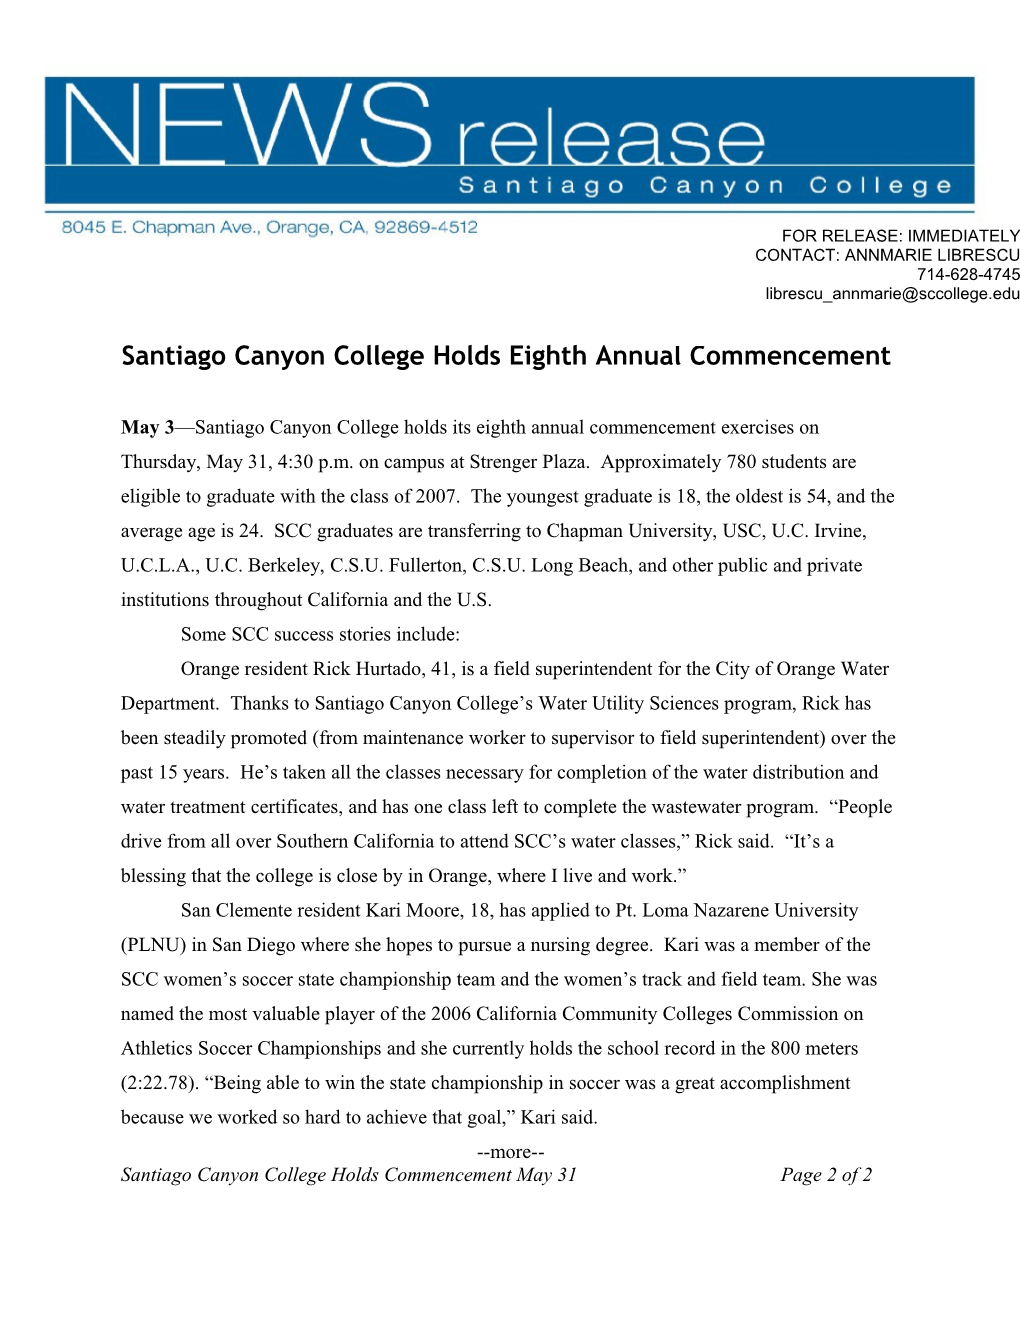 2007 Early SCC Commencement Press Release